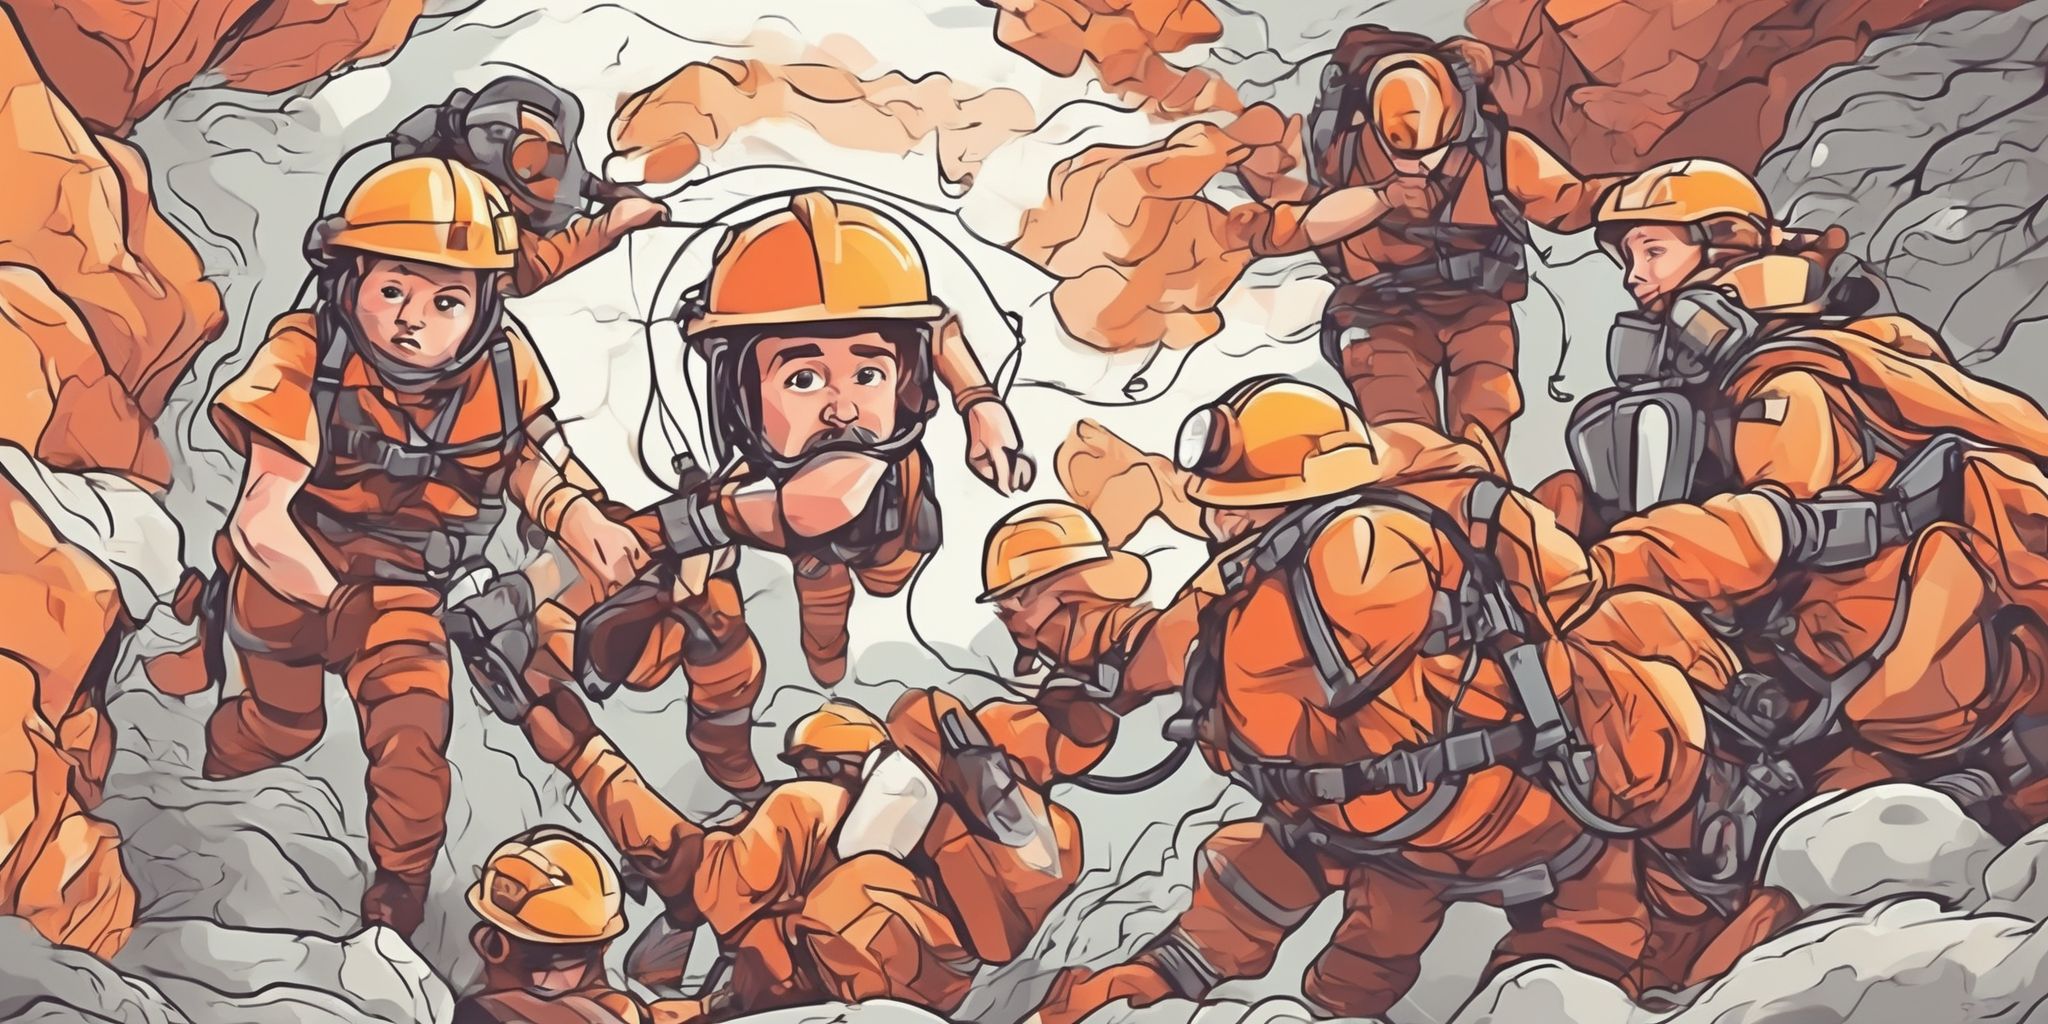 rescue in illustration style with gradients and white background